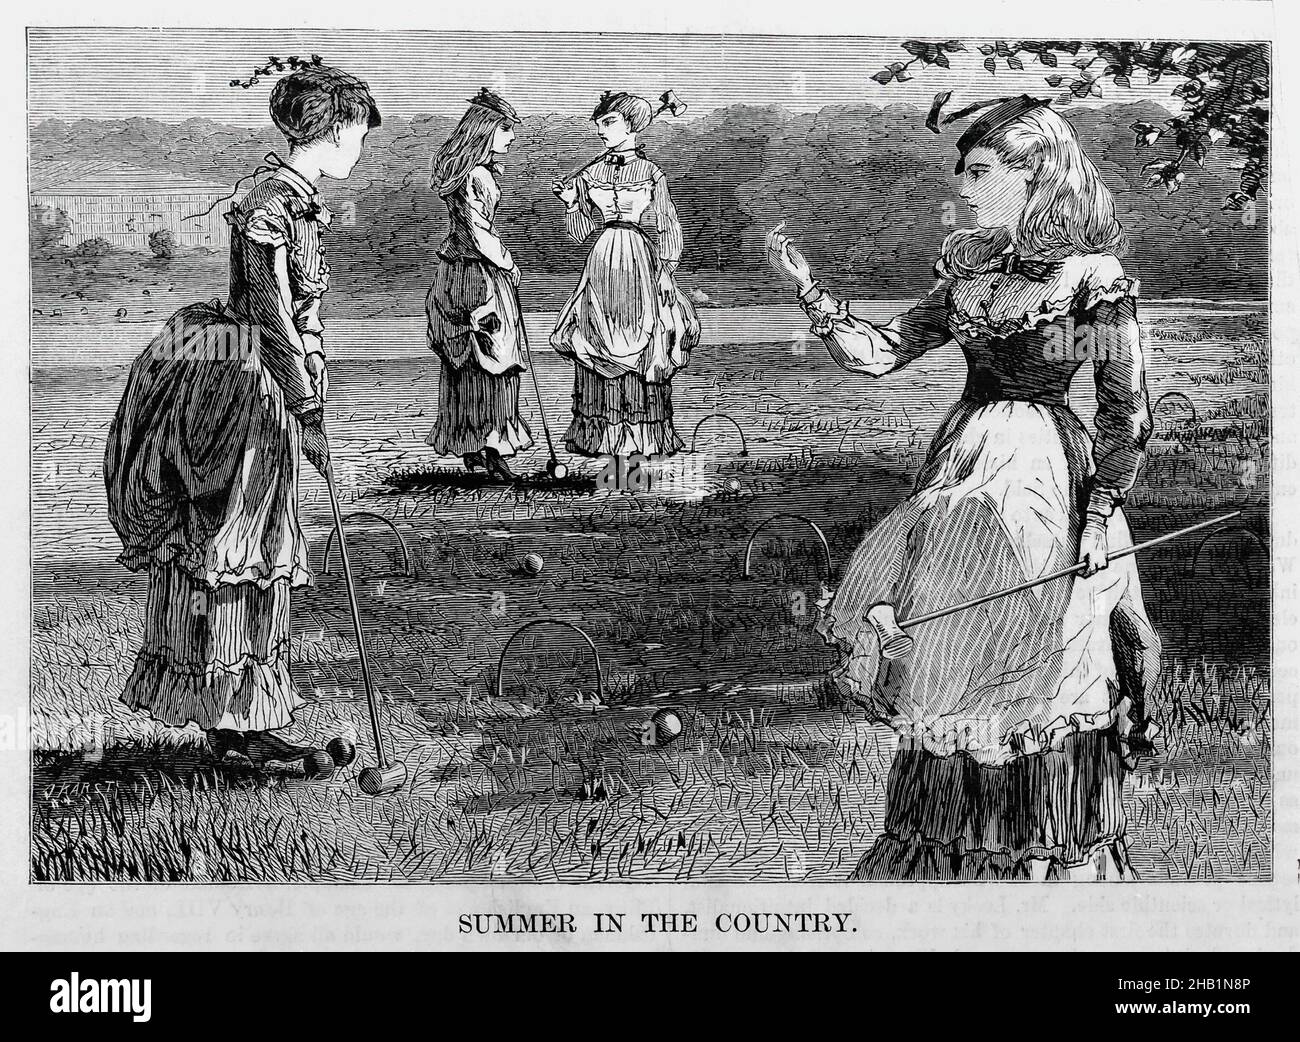 Summer in the Country, Winslow Homer, American, 1836-1910, Wood engraving, 1869, Image: 4 1/2 x 6 1/2 in., 11.4 x 16.5 cm, 1860s, American, Americana, ball, by-gone era, competitive, Country, croquet, engraving, Female, figures, frocks, Game, Homer, Ladies, Lady, leisure, nostalgic, outdoors, petticoats, play, Polo, print, recreation, sport, summer, Victorian, wicket, Women, Wood, wood engraving Stock Photo